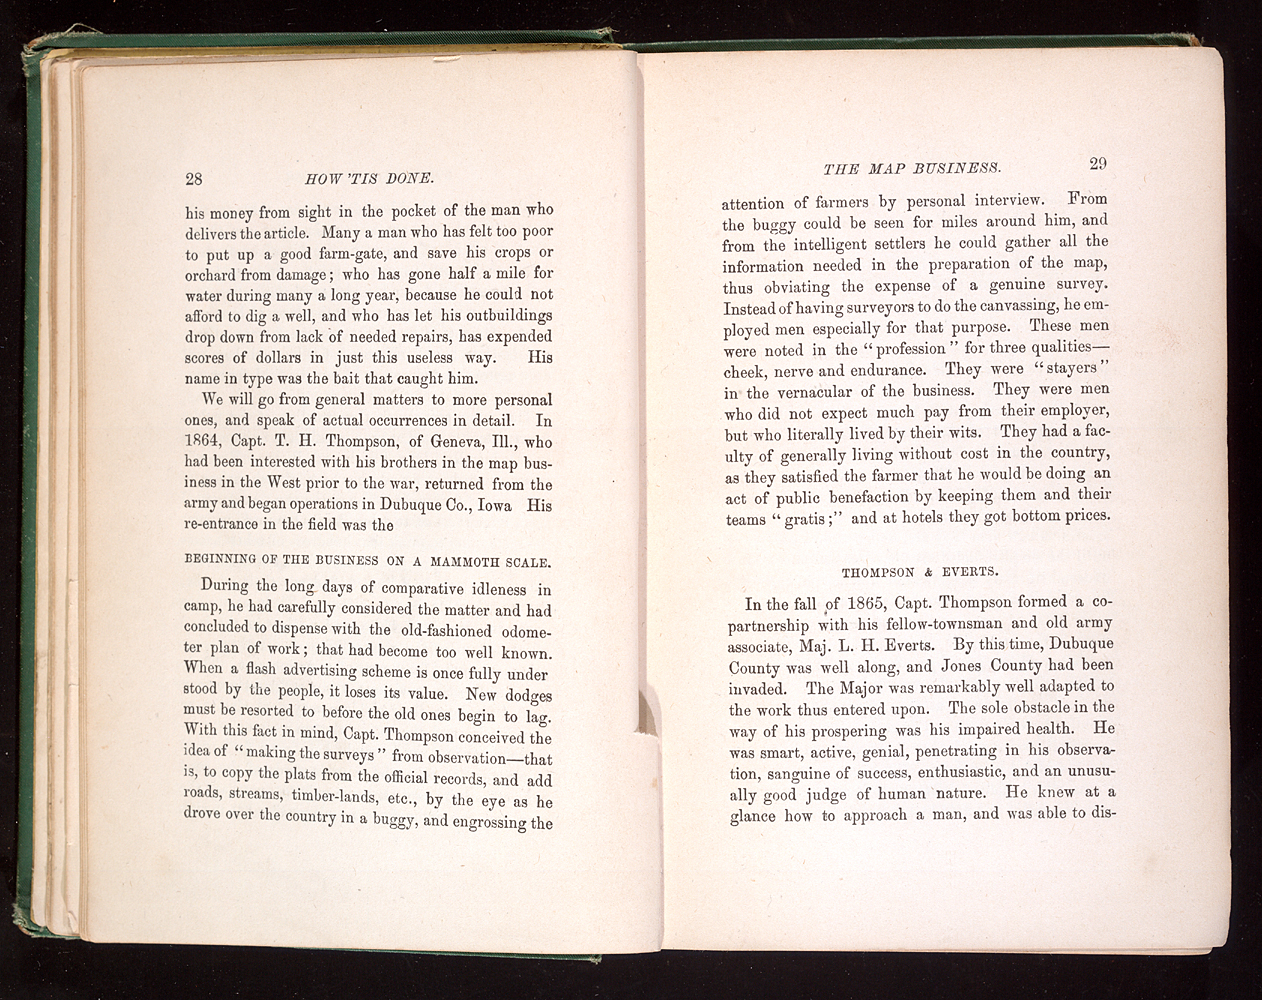 Original Interior Printing of How Tis Done from 1879